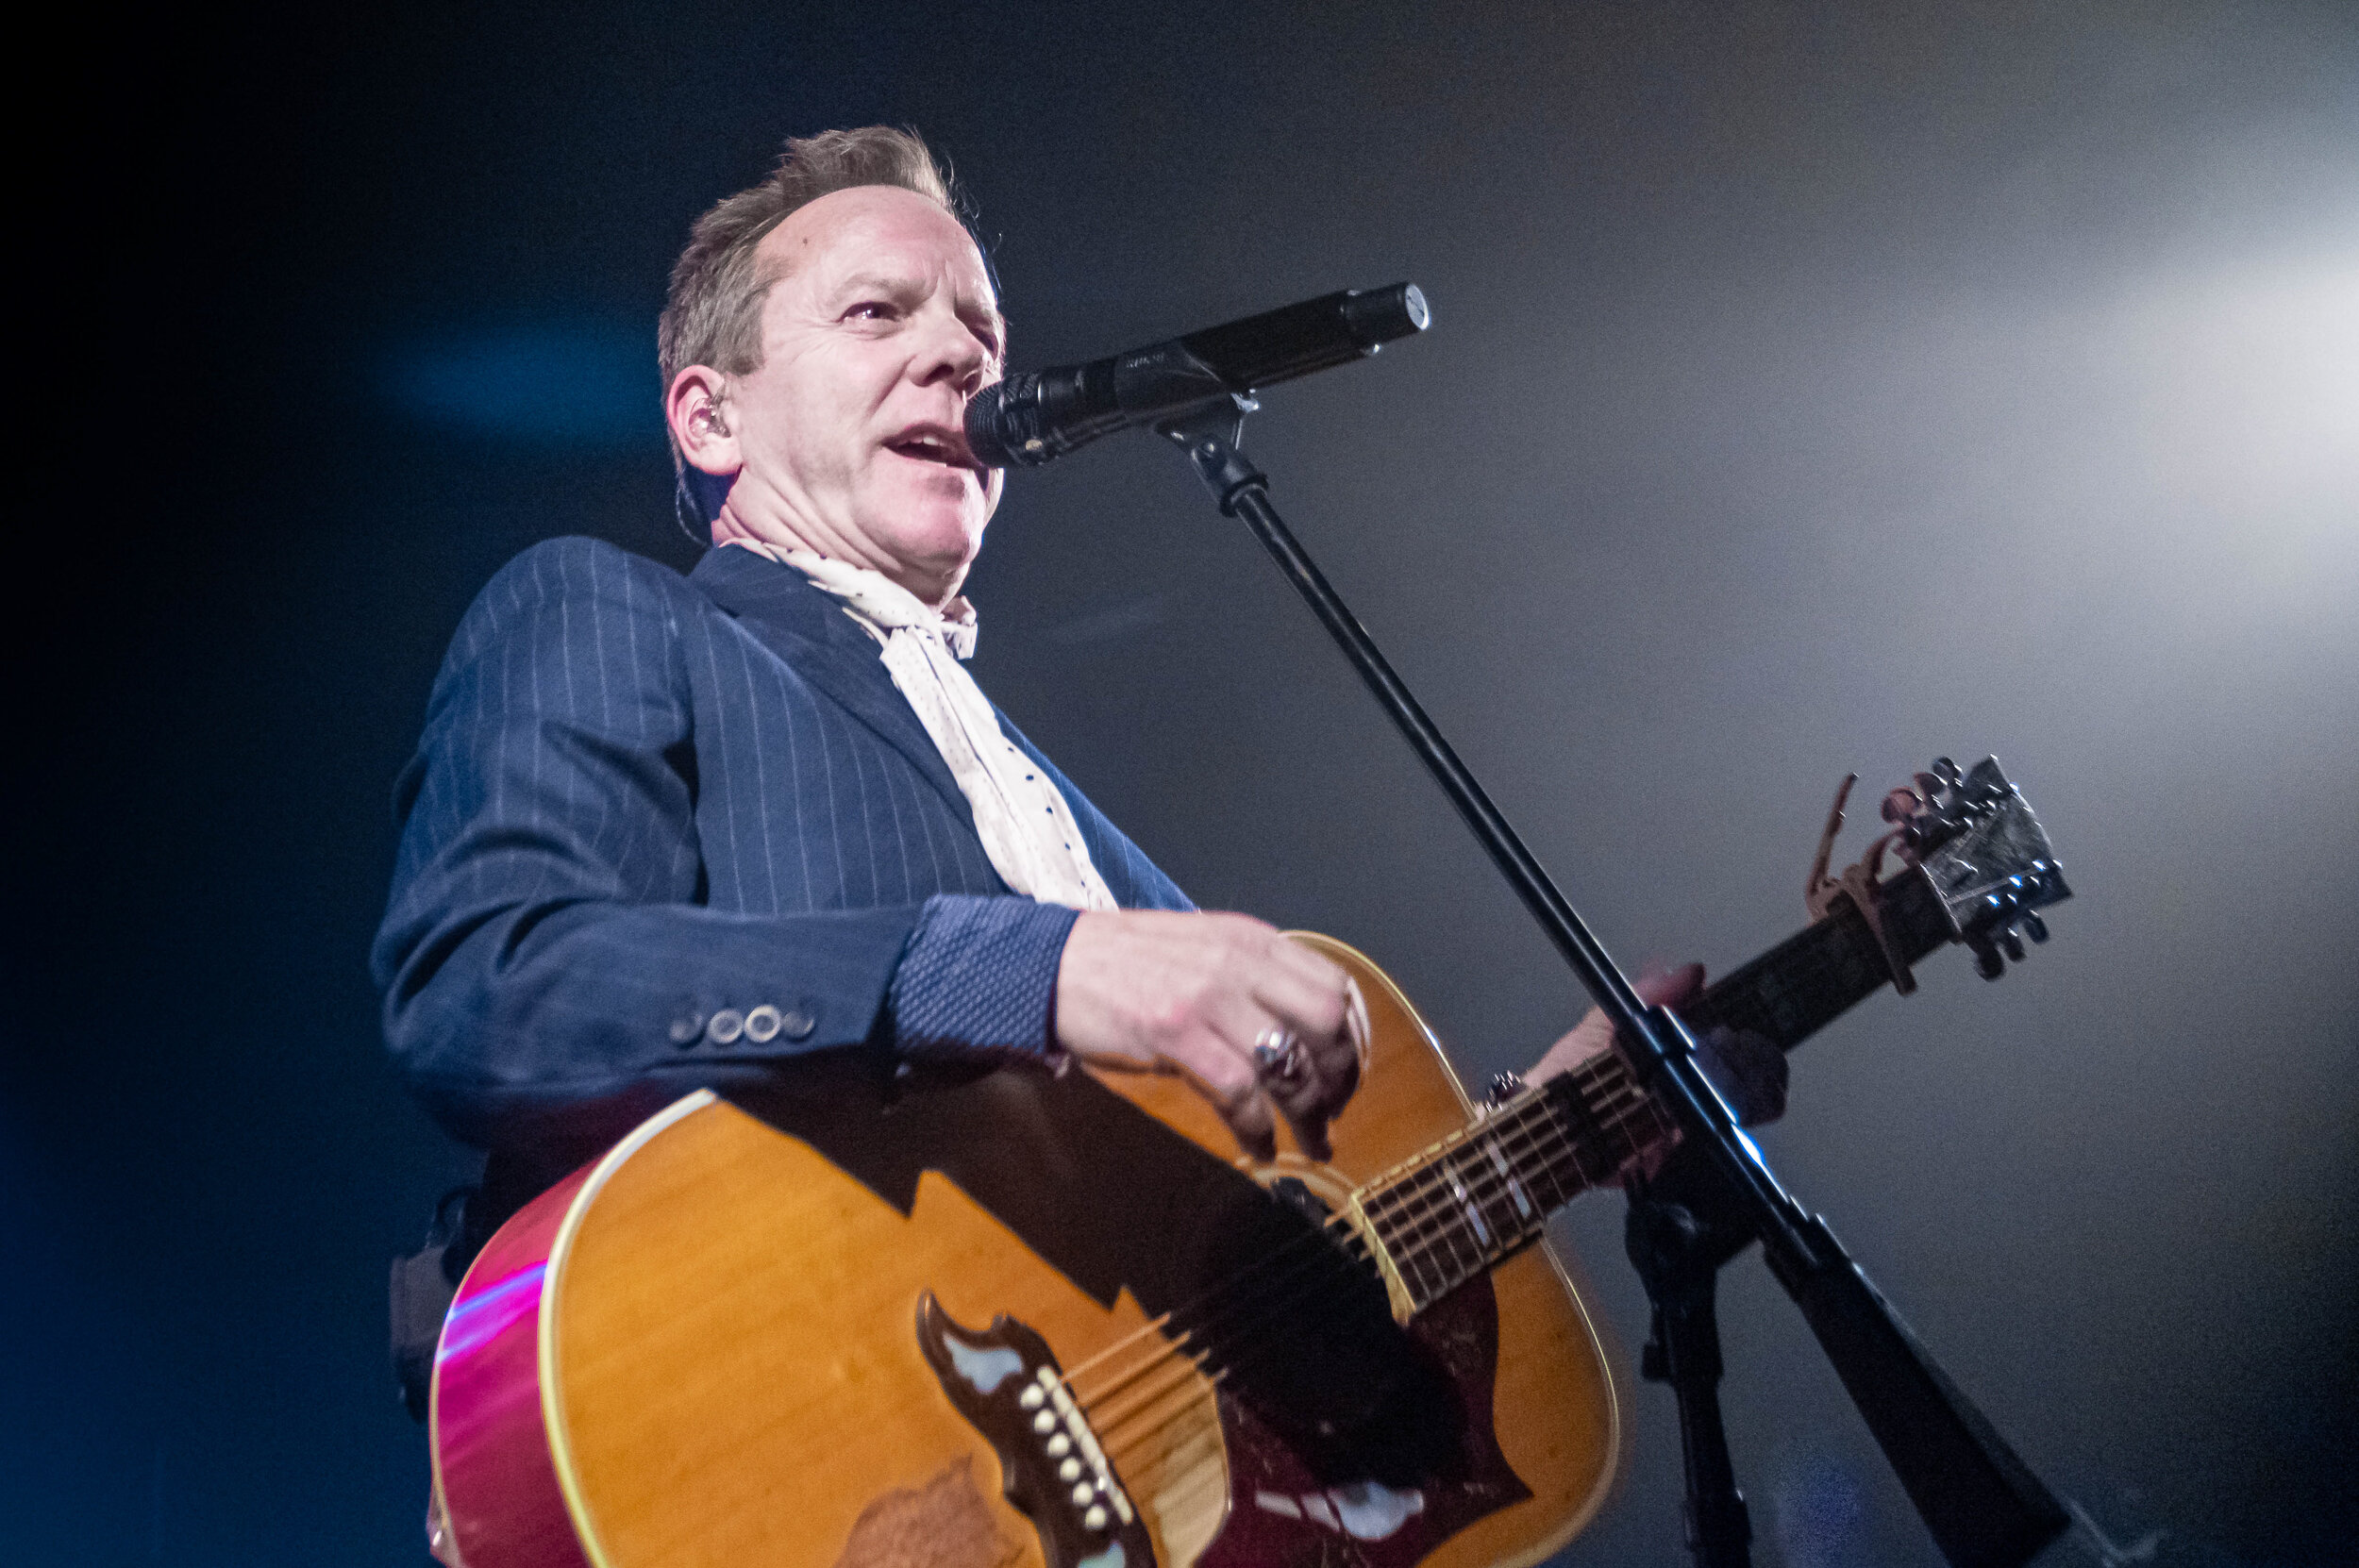 Kiefer Sutherland Live in concert at the O2 Academy Oxford. March 2020.